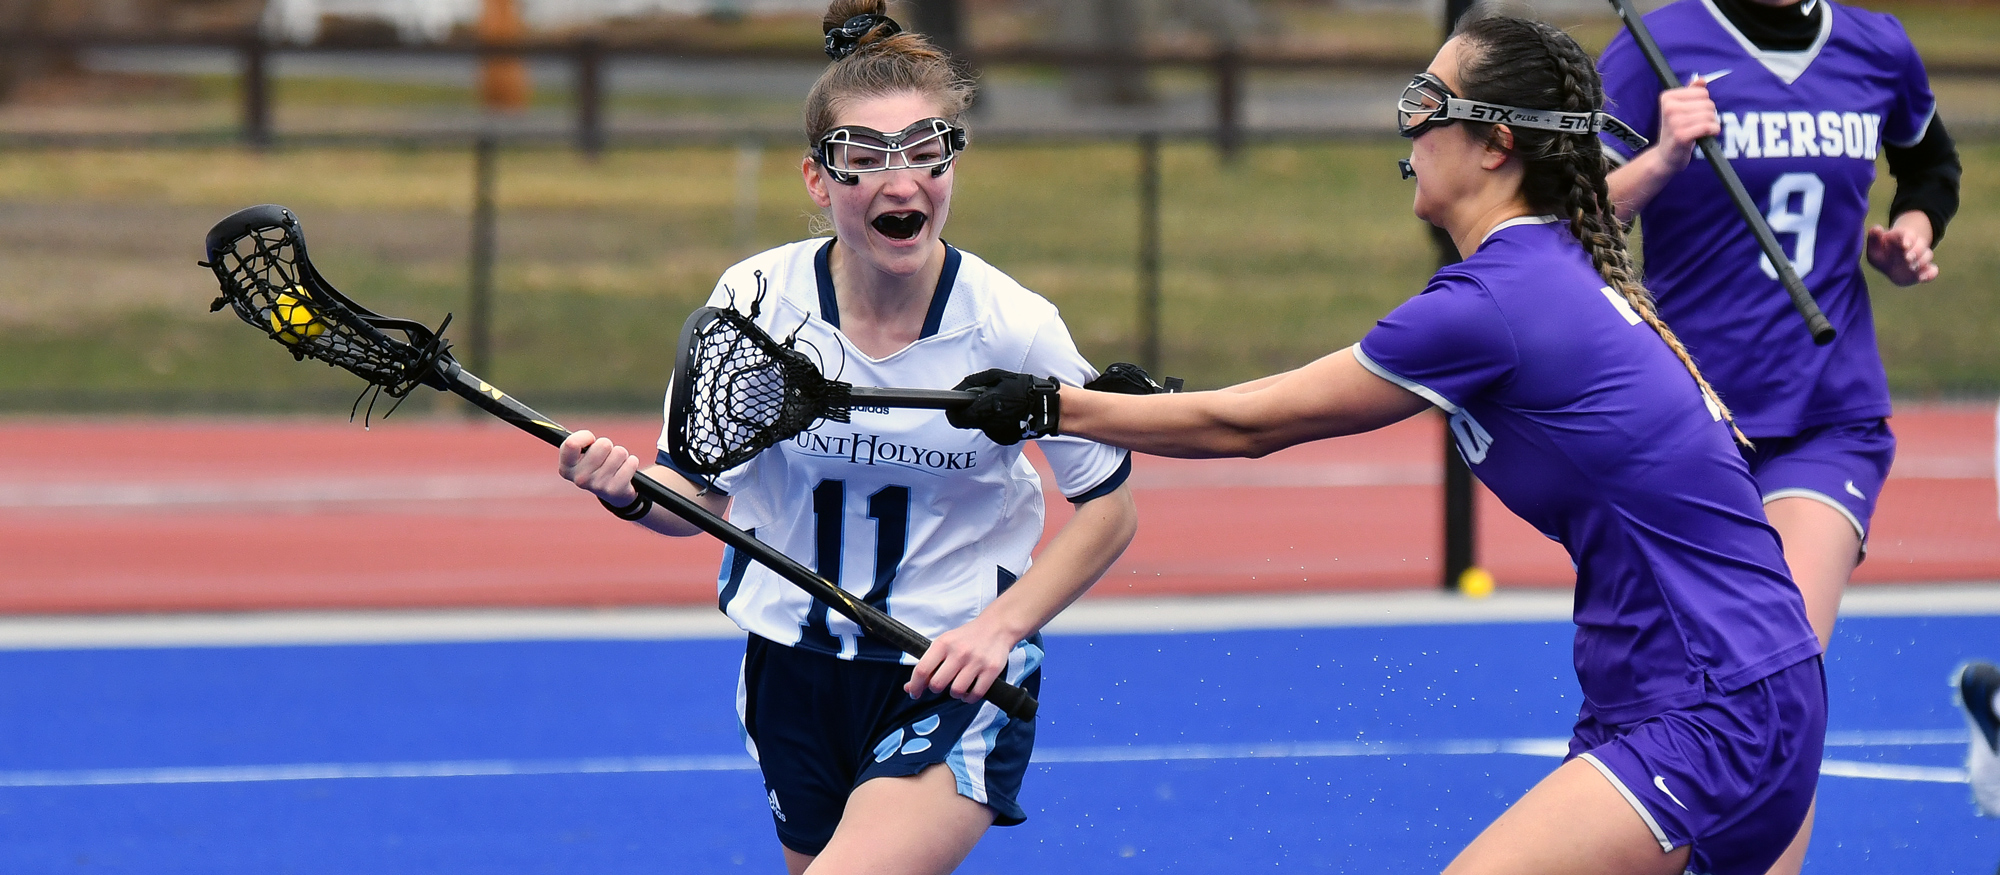 Junior captain Hannah Bisson has battled back from multiple surgeries to take the field for Mount Holyoke College lacrosse. (RJB Sports file photo)